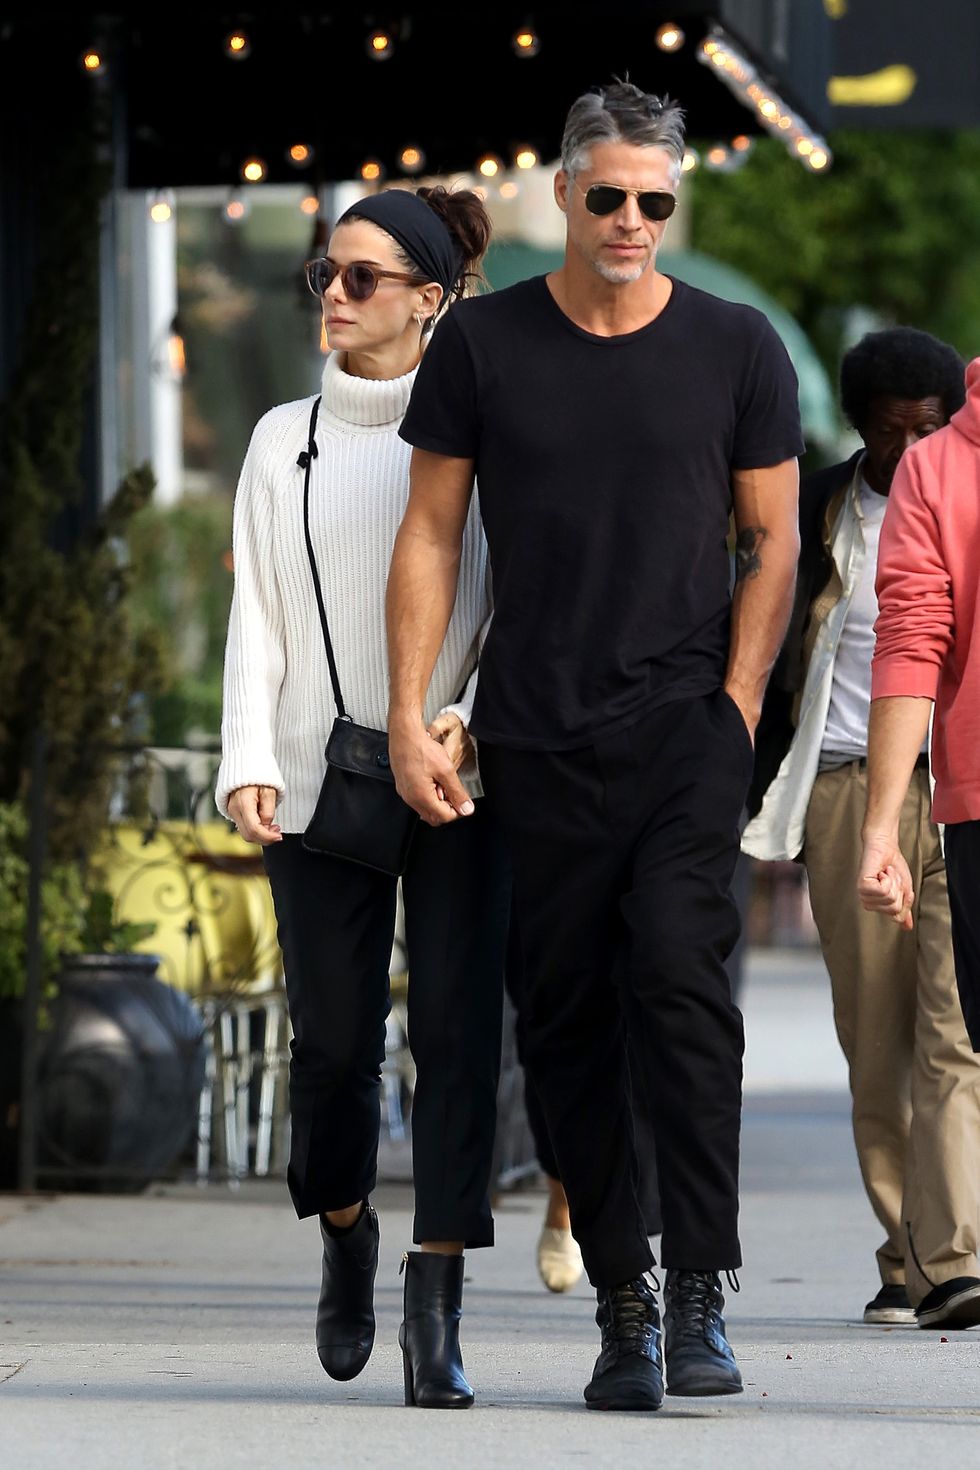 premium exclusive must call for pricing los angeles, ca sandra bullock and new love bryan randall hold hands for a casual coffee outing at andante coffee roaster the loved up couple were spotted inside showing a lot of affection toward each other during their time inside an eyewitness said bryan had his arm around sandra as they waited for their coffee orders to be made the hot new couple walked out locking their hands again for the short stroll to their car to head home akm gsi november 4, 2015mandatory credit must read fameflynetakm gsito license these photos, please contact steve ginsburg310 505 8447323 423 9397steveakmgsicomsalesakmgsicomormaria buda917 242 1505mbudaakmgsicomginsburgspalyincgmailcom